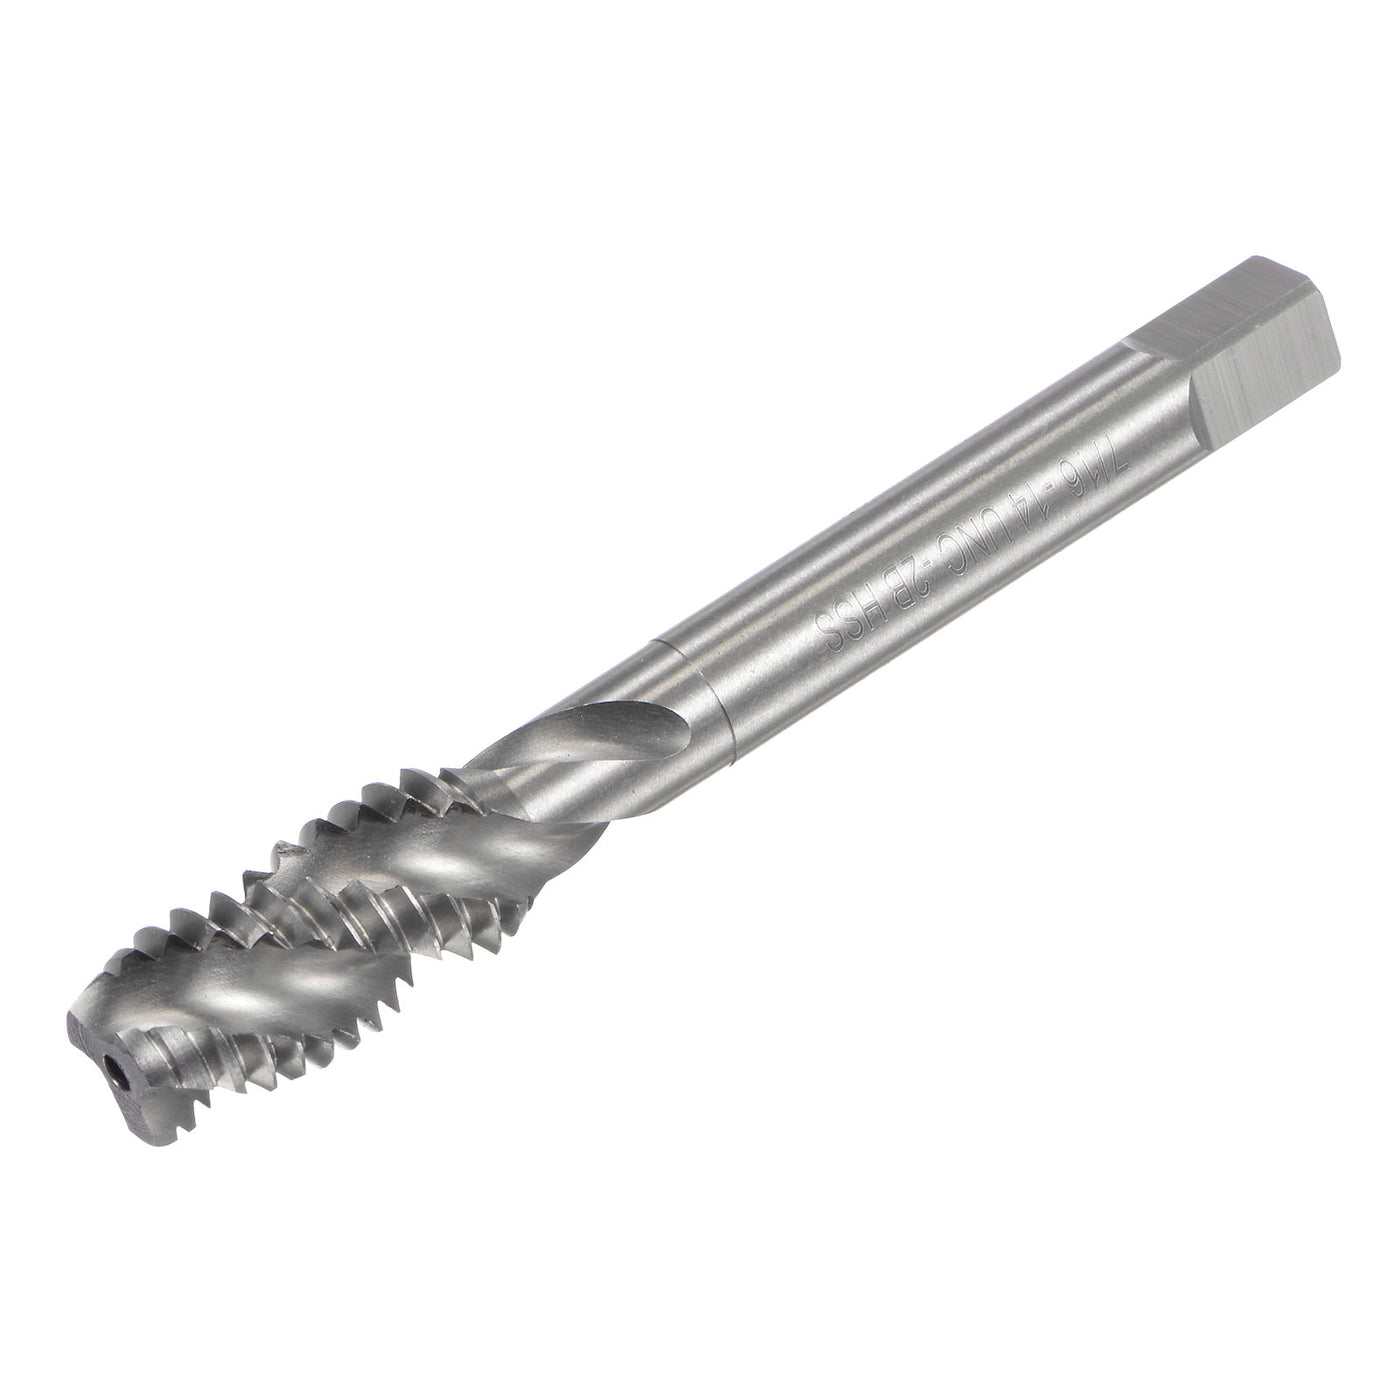 uxcell Uxcell 7/16-14 UNC 2B High Speed Steel Uncoated Machine Spiral Flutes Threading Tap